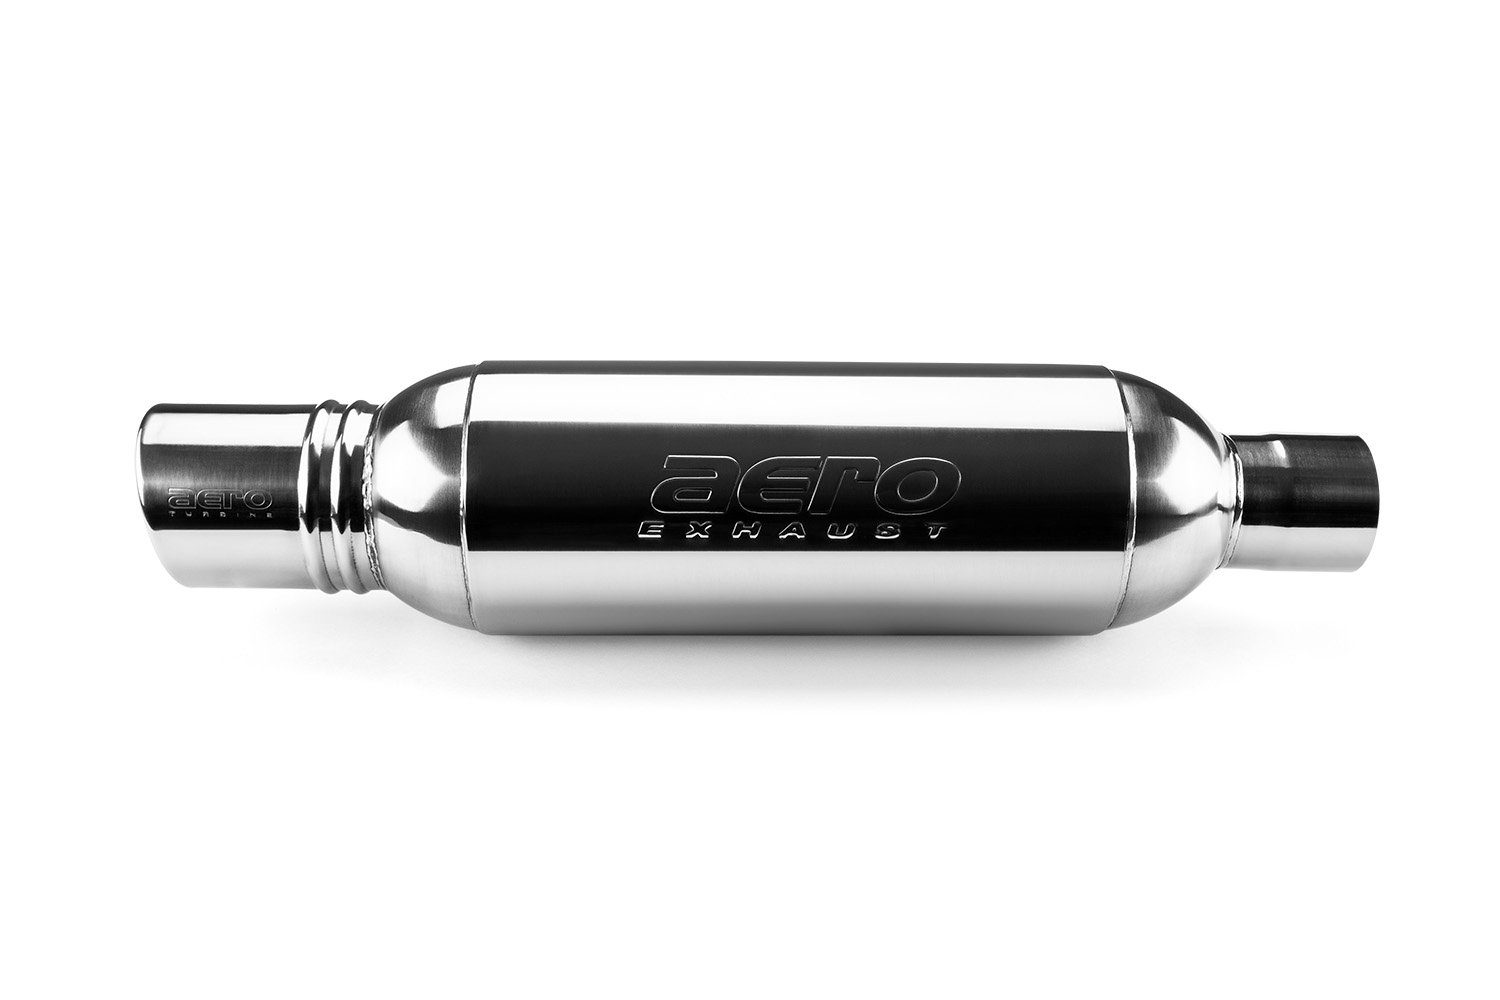 Turbine XL Performance Muffler, Inlet/Outlet: 3 in./4 in., Overall Length: 26 in. [Mirror Polished Finish]